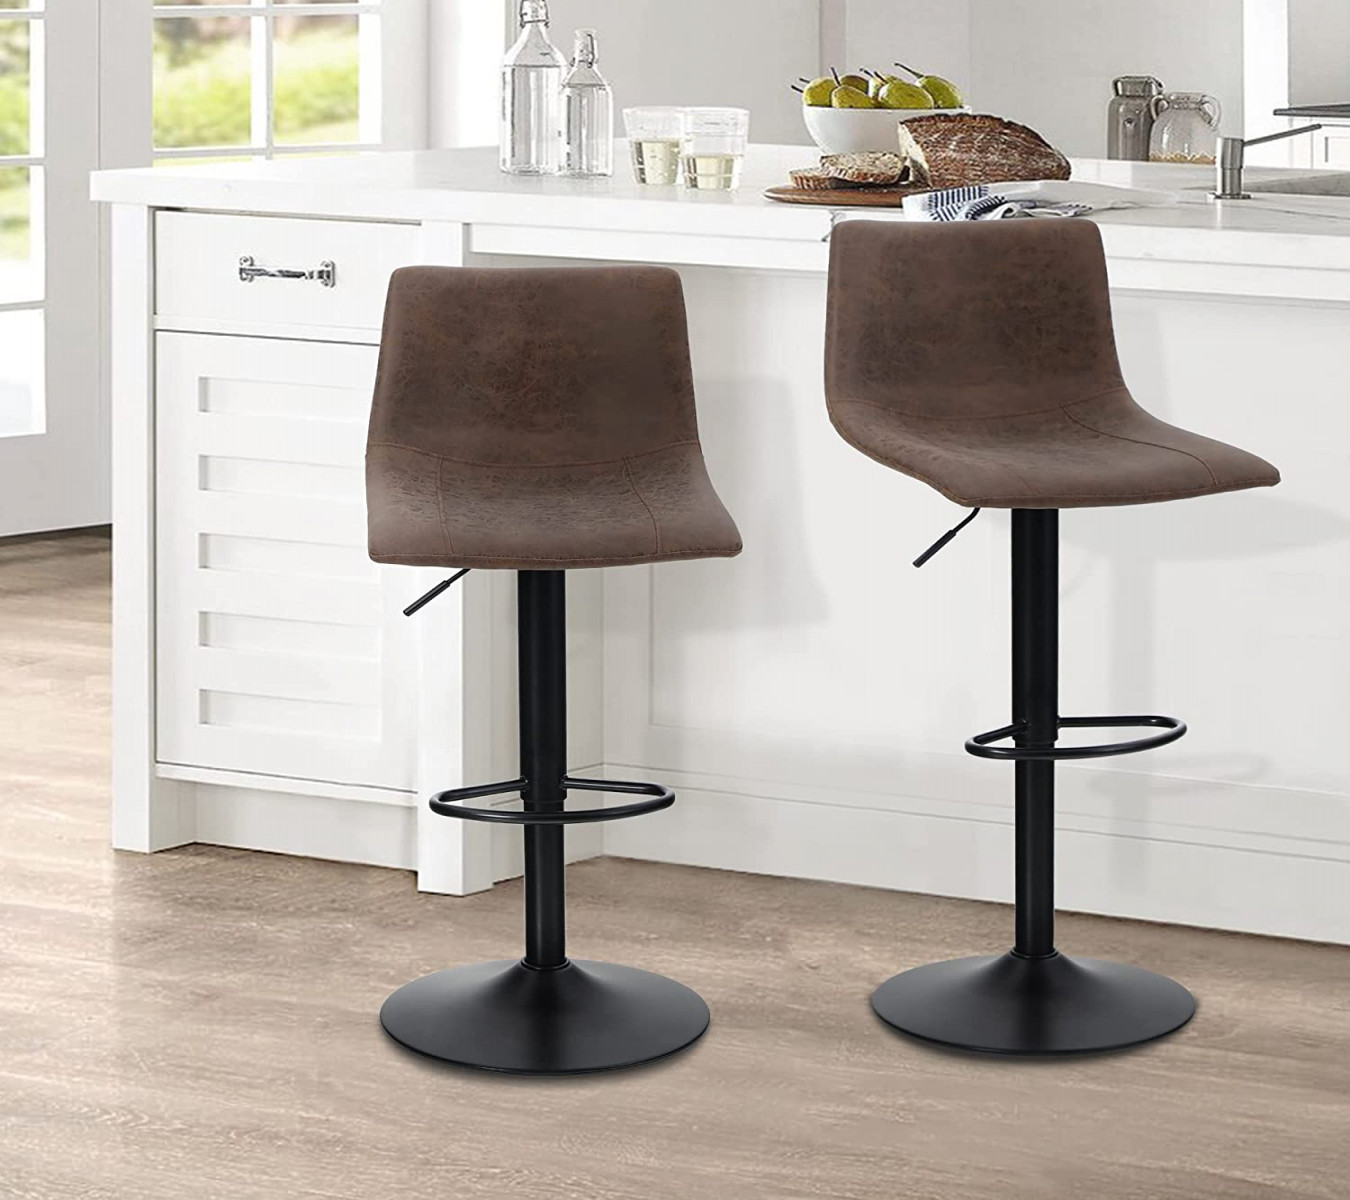 ALPHA HOME Bar Stools, Set of , Height-Adjustable,  Degree Rotating Bar  Stools with Backrest, Modern Kitchen Counter Stool, PU Leather Dining Room